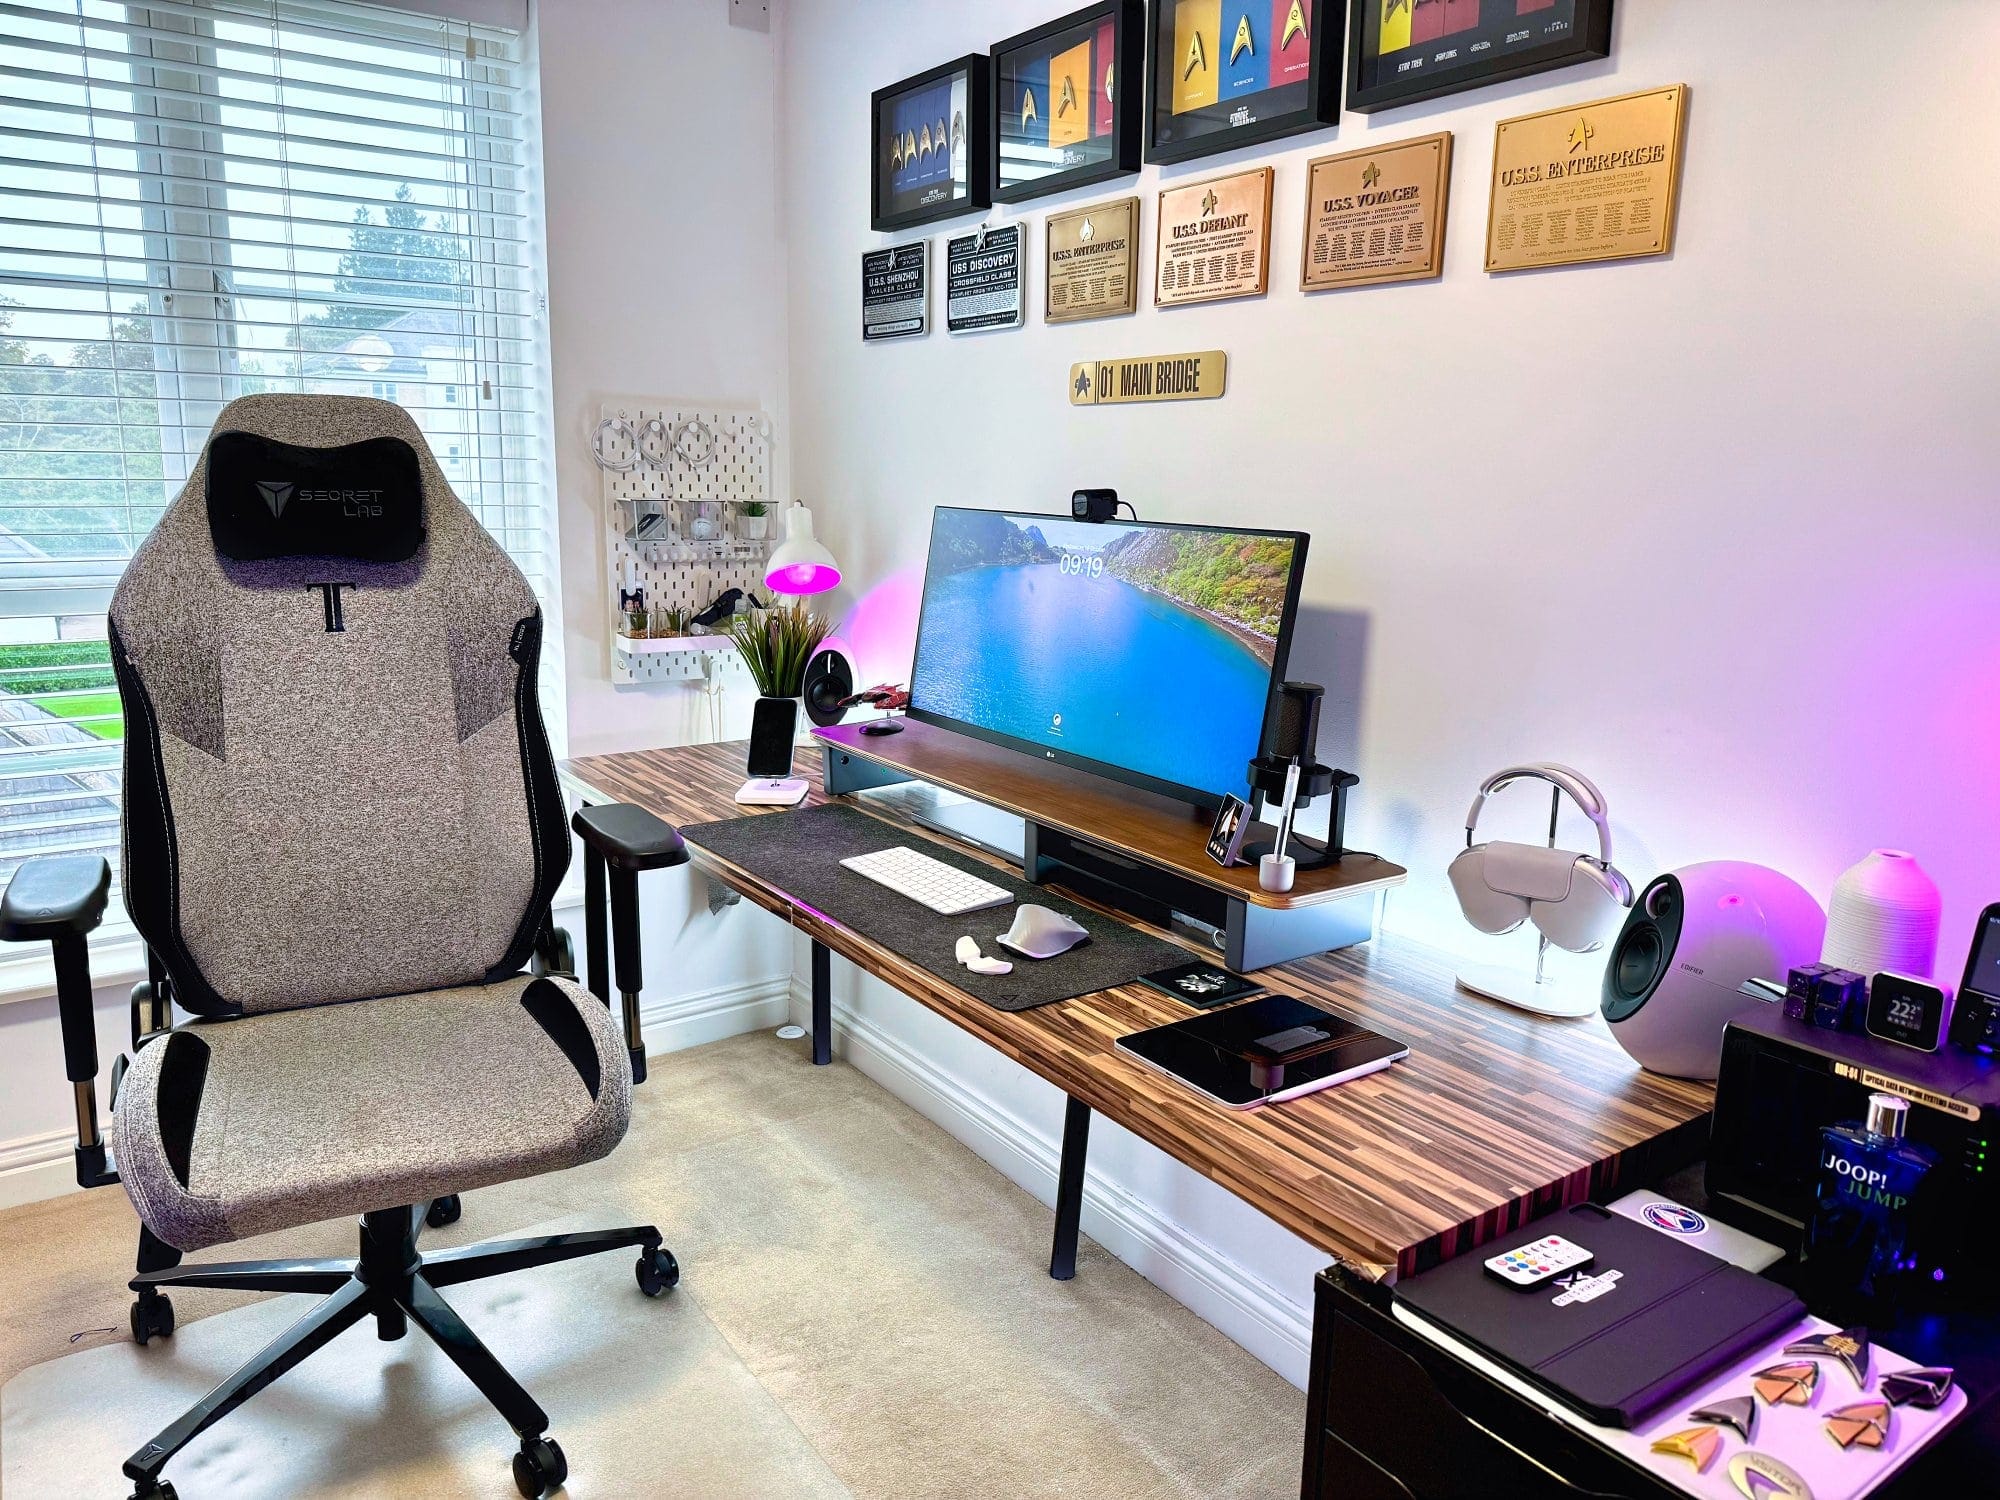 A comfortable home office setup with a large window, a textured gaming chair, a wooden desk